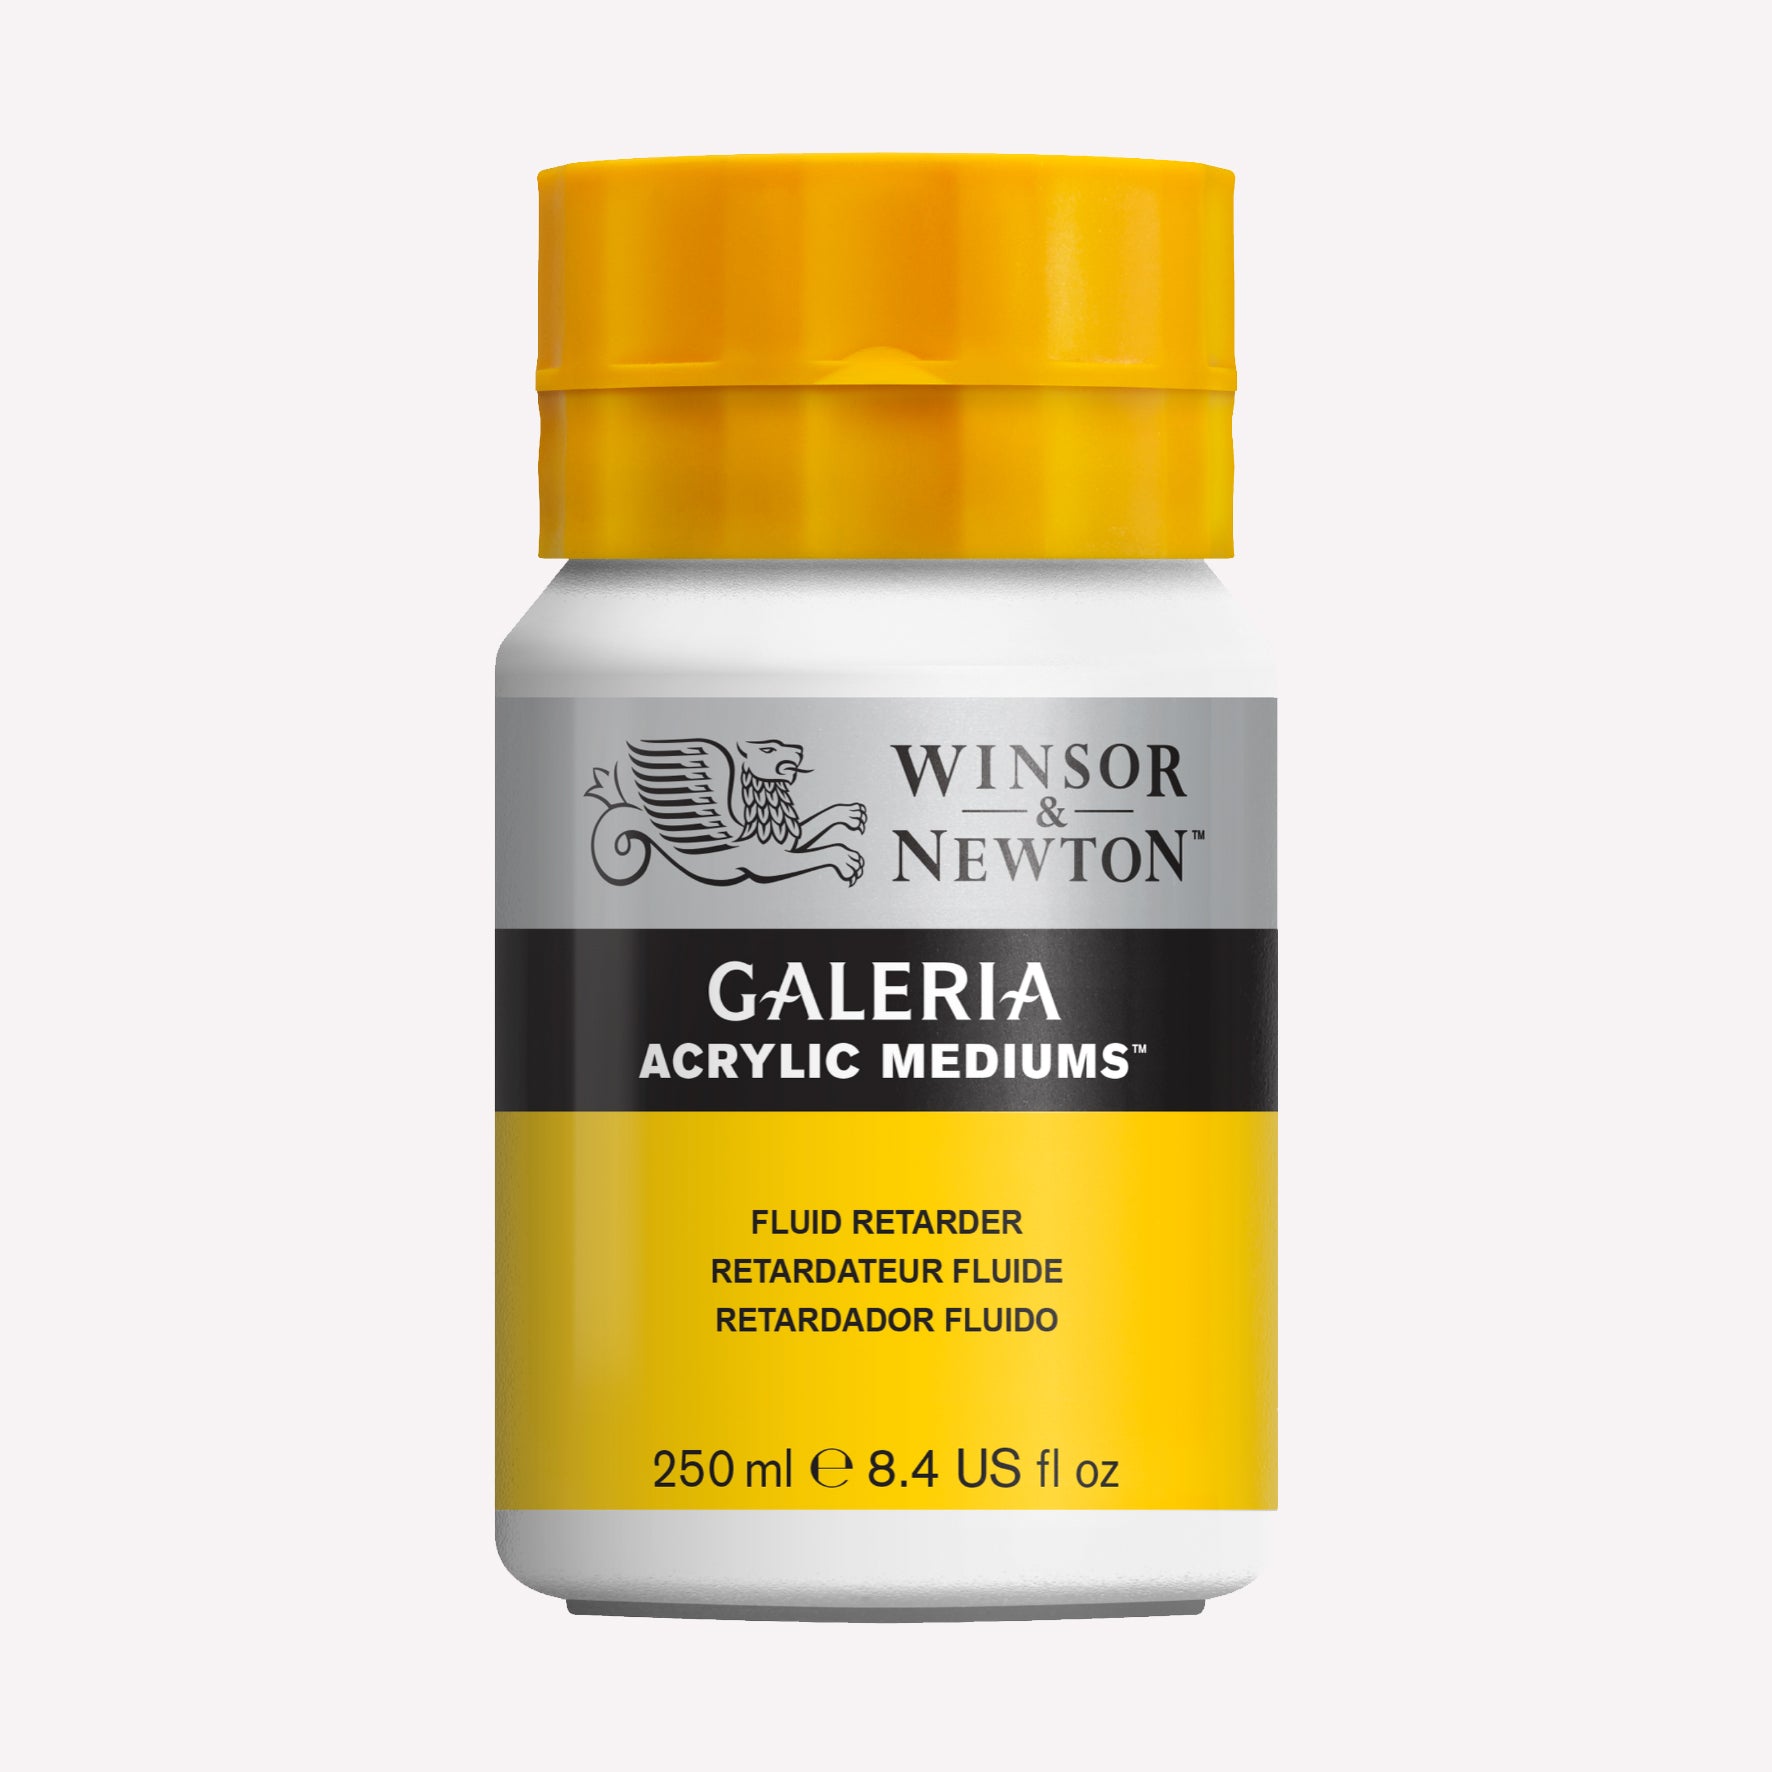 Winsor & Newton's Galeria Acrylic Fluid Retarder packaged in a 250ml tub, used to extend paint colour and increase flow. 